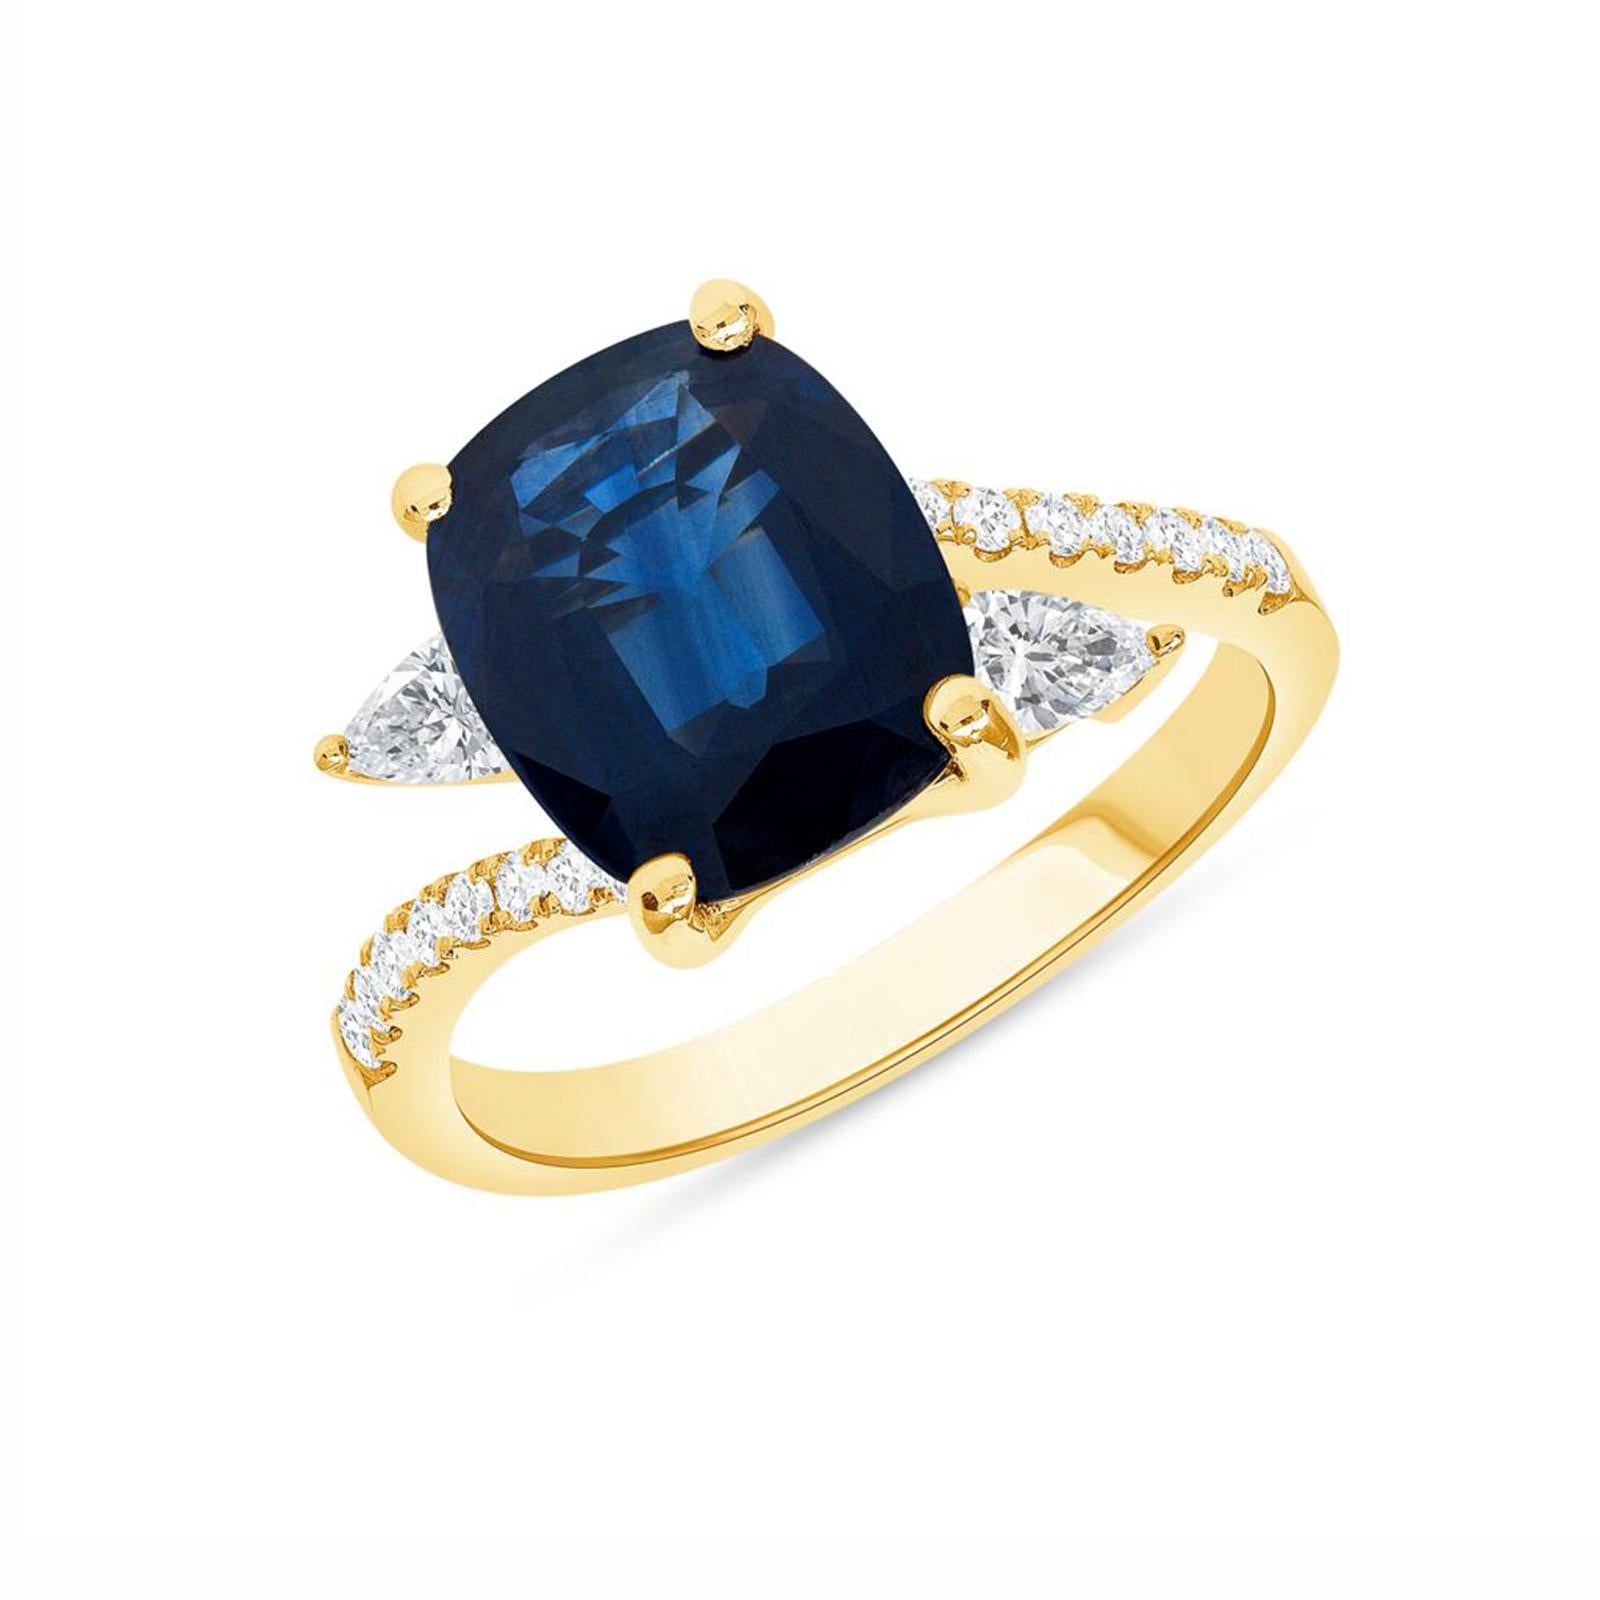 100% Authentic, 100% Customer Satisfaction

Height: 10.5 mm

Band Width: 2 mm

Size: 7 ( Contact Us for Sizing)

Metal:18K Yellow Gold

Hallmarks: 18K

Total Weight: 3.91 Grams

Stone Type: 3.65 CT Natural Thai Sapphire & 0.53 CT